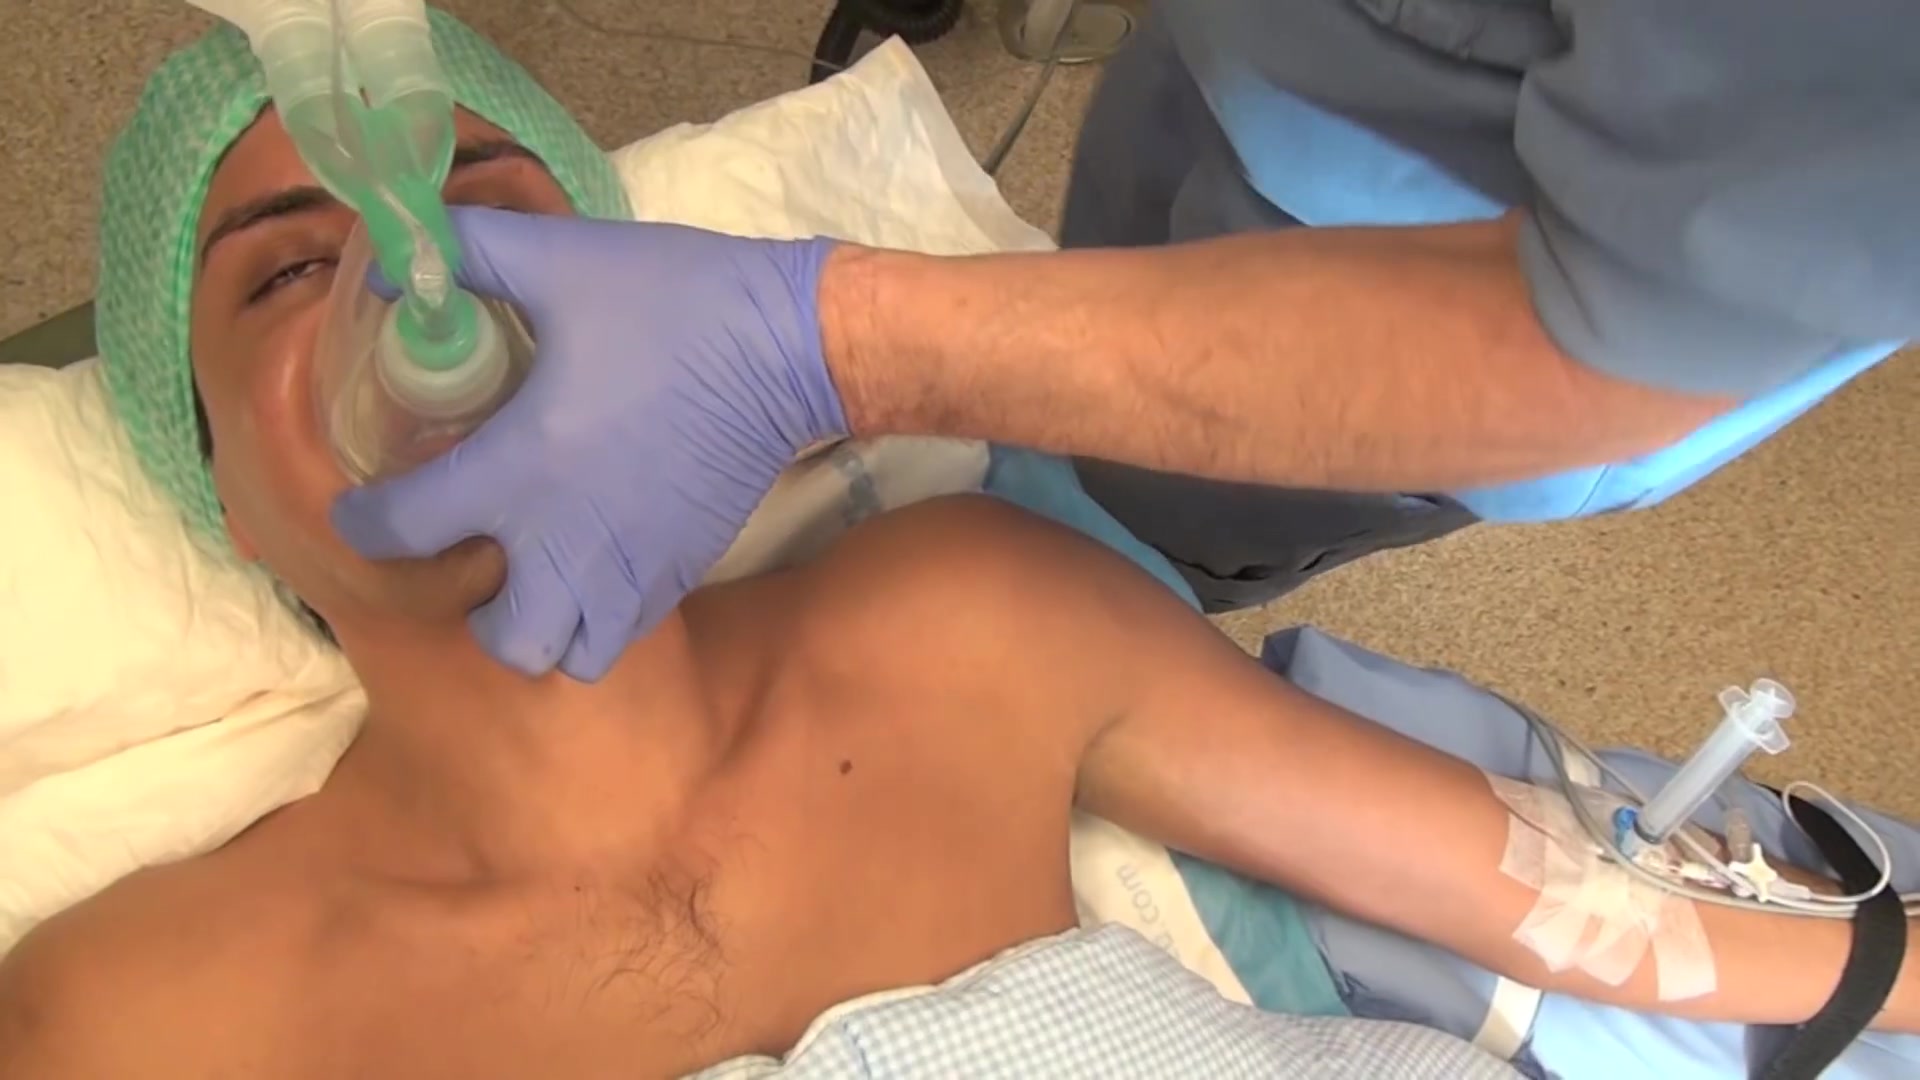 Anesthesia Patient Porn - Medical: Anesthesia 2 - video 2 - ThisVid.com